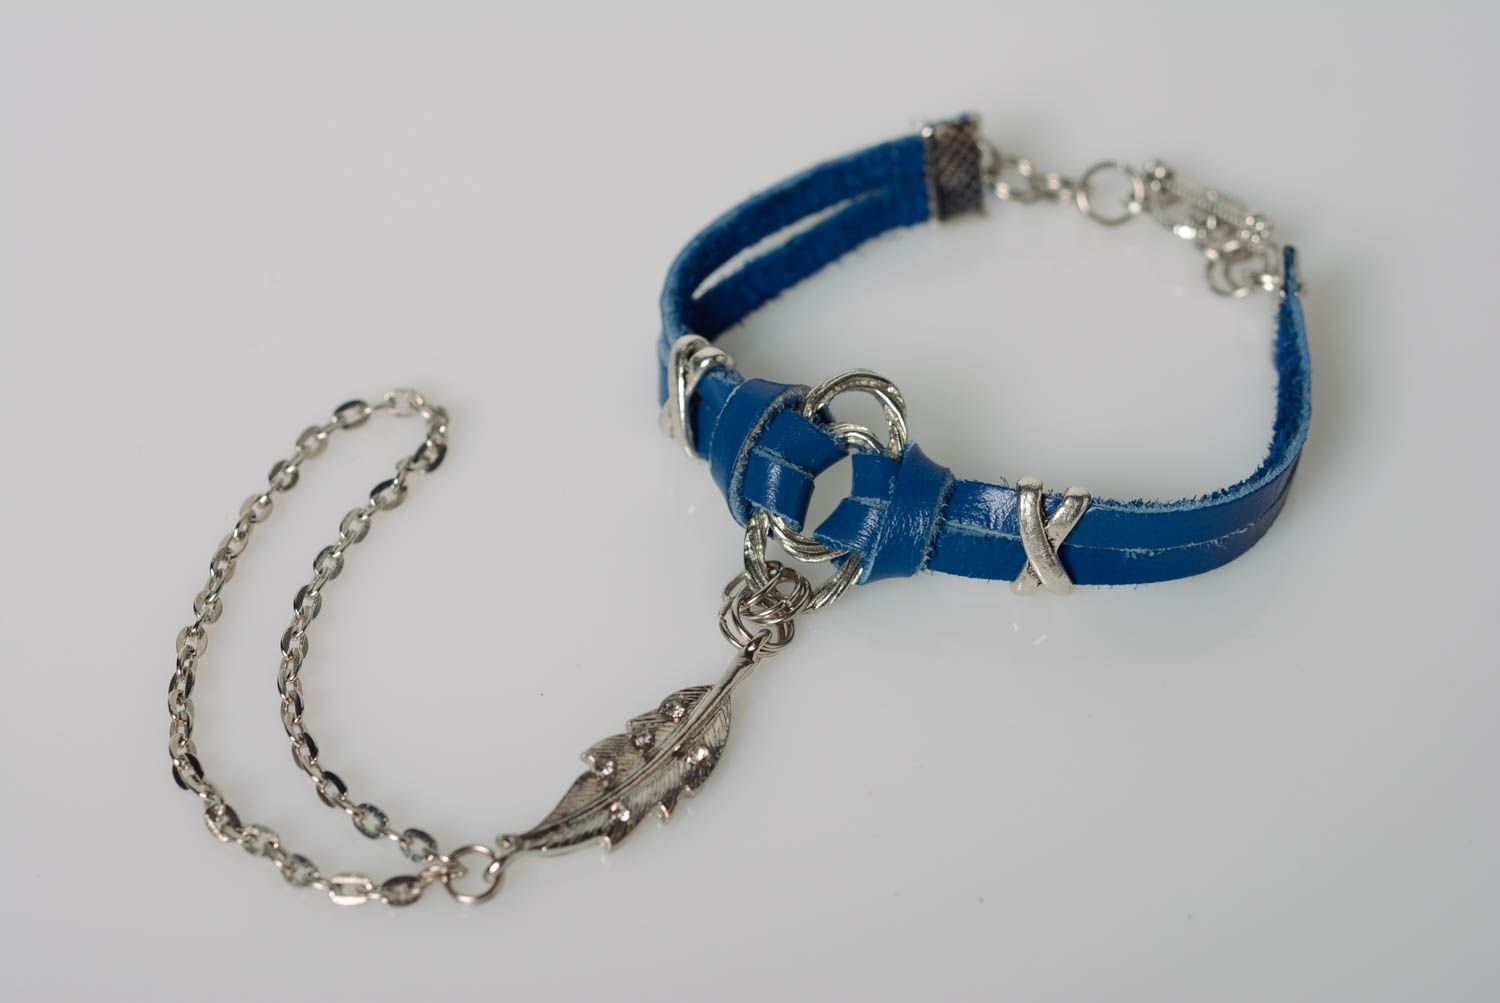 Unusual handmade genuine leather slave bracelet of blue color with metal charm photo 1